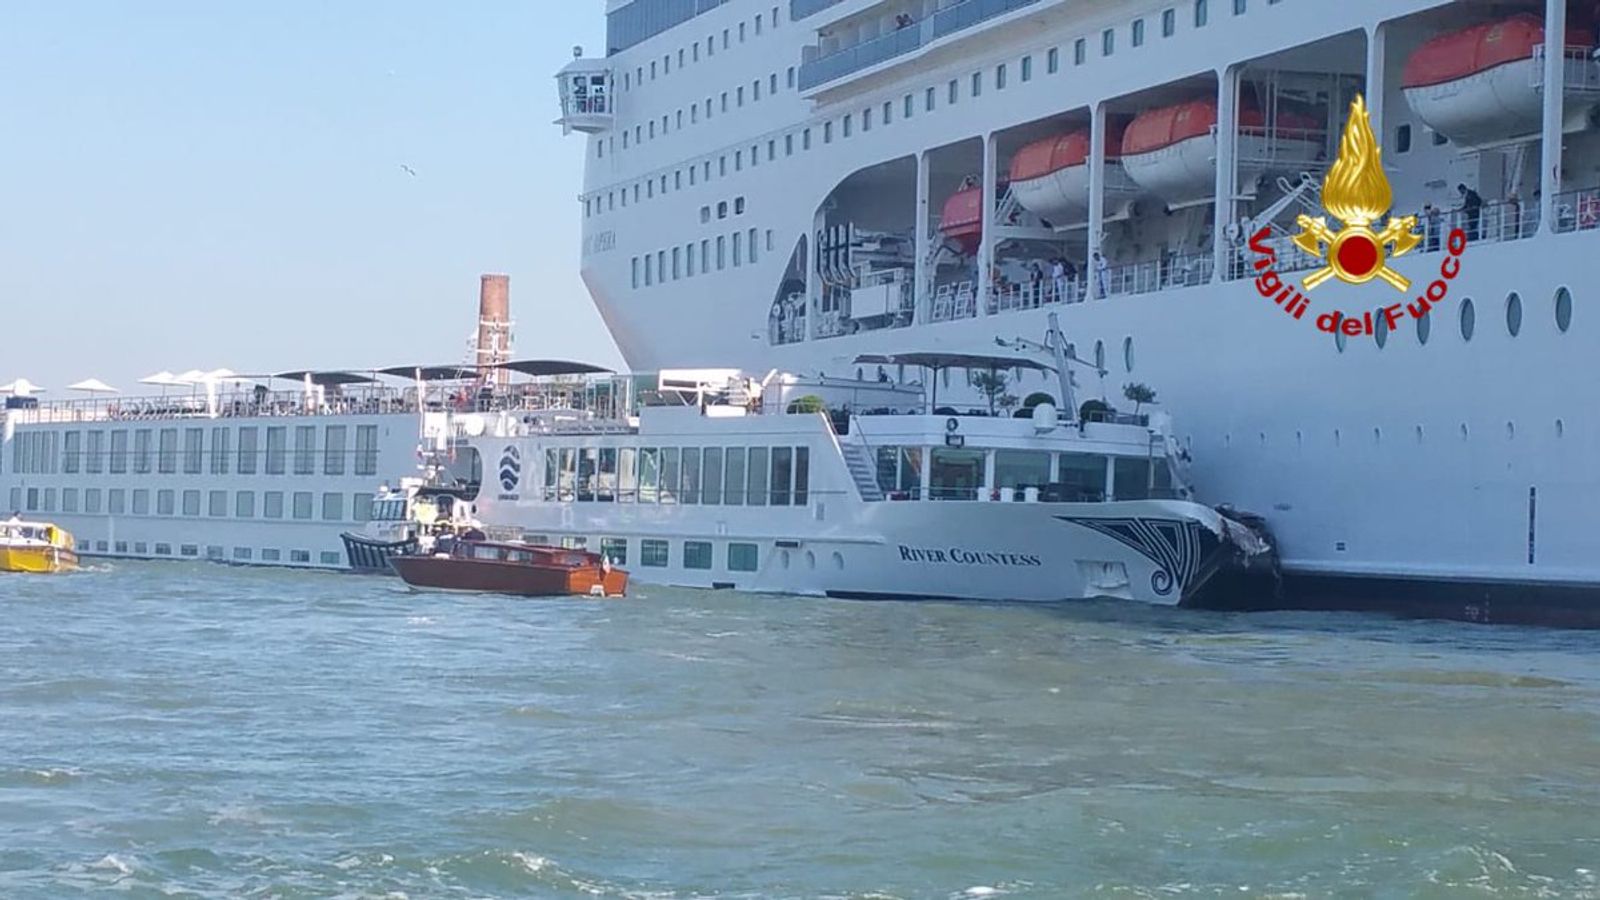 cruise ship crashes into dock and tourist boat in venice